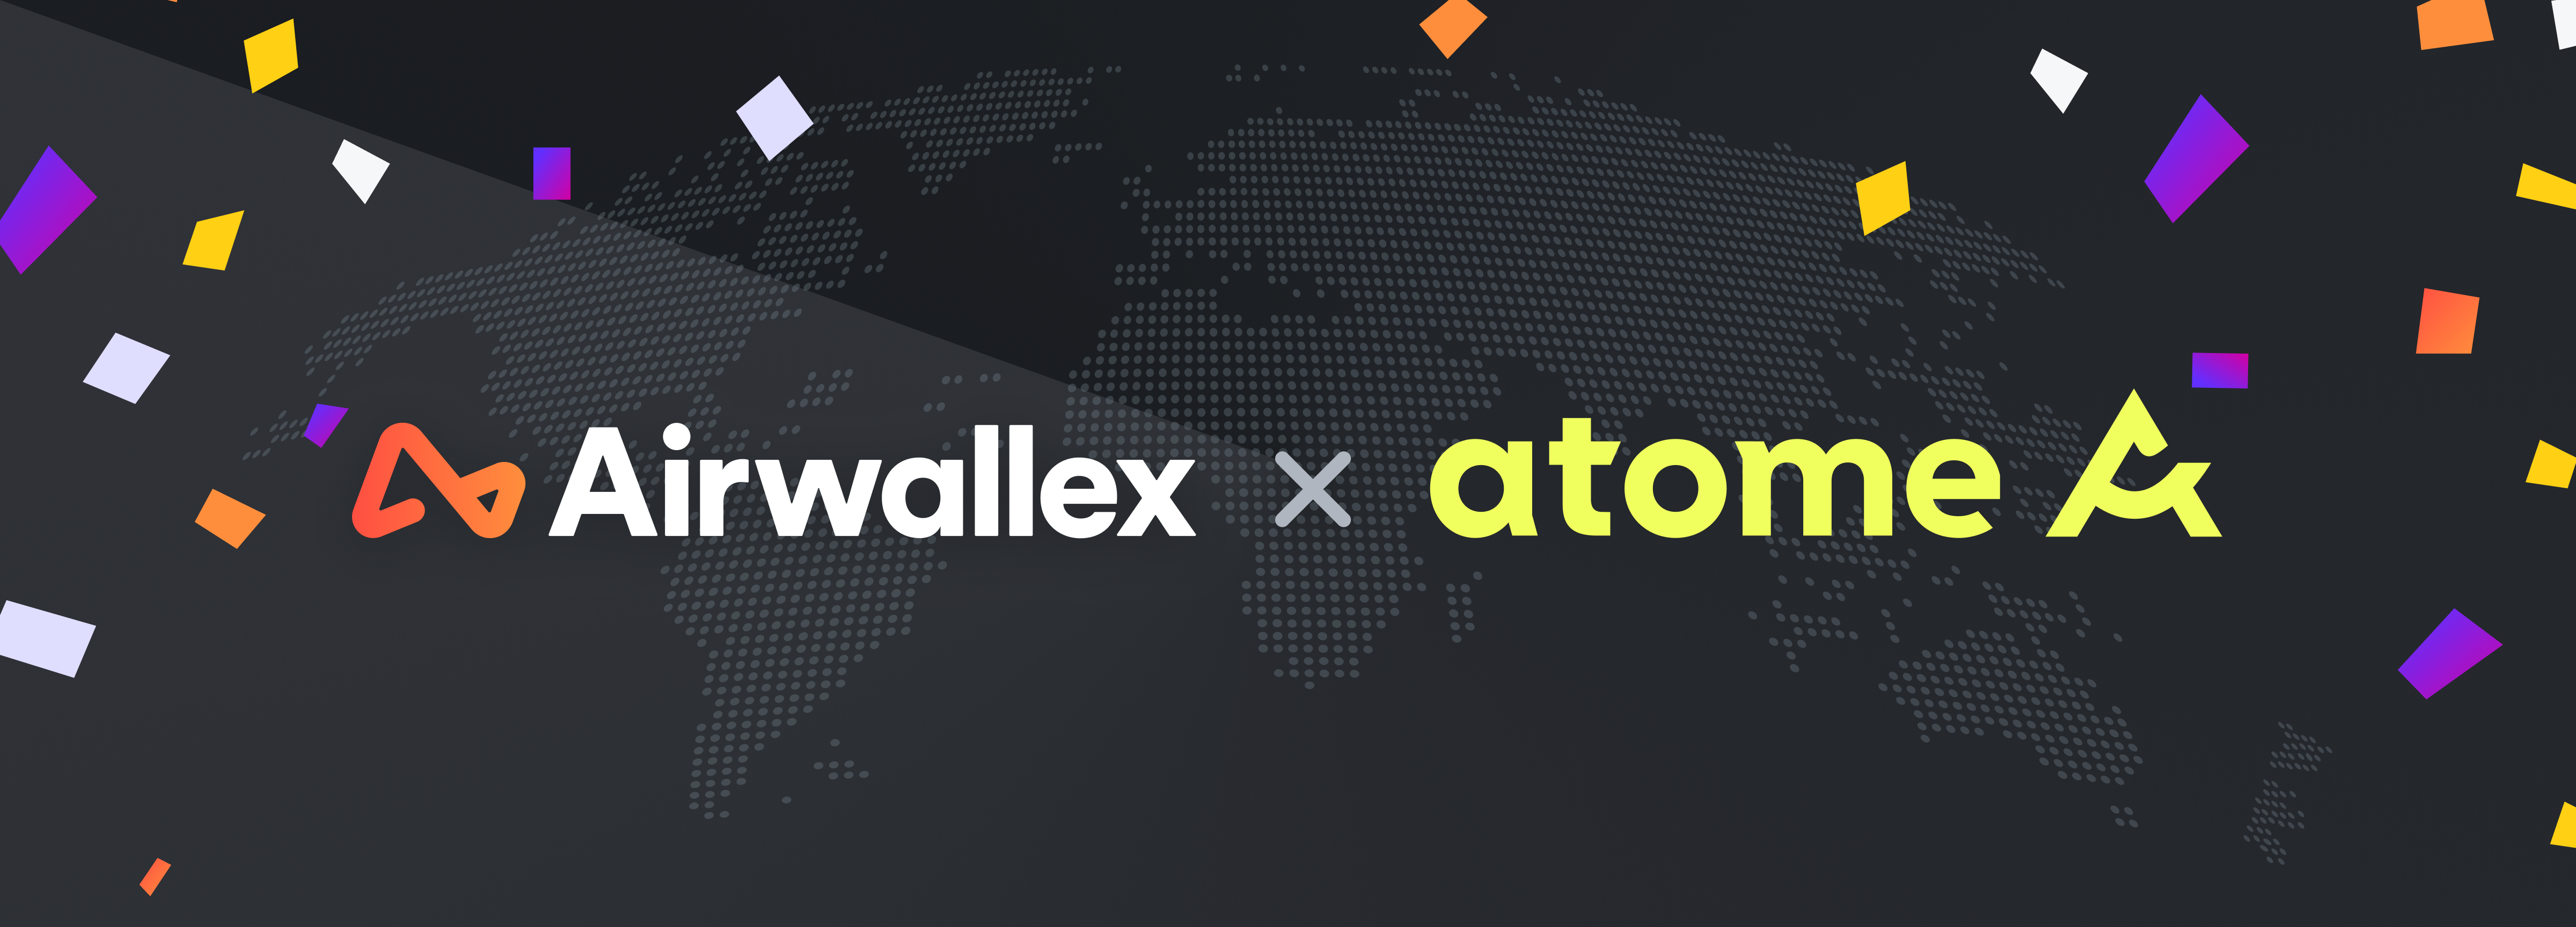 Airwallex enables merchants to accept Buy Now Pay Later payment option through partnership with Atome